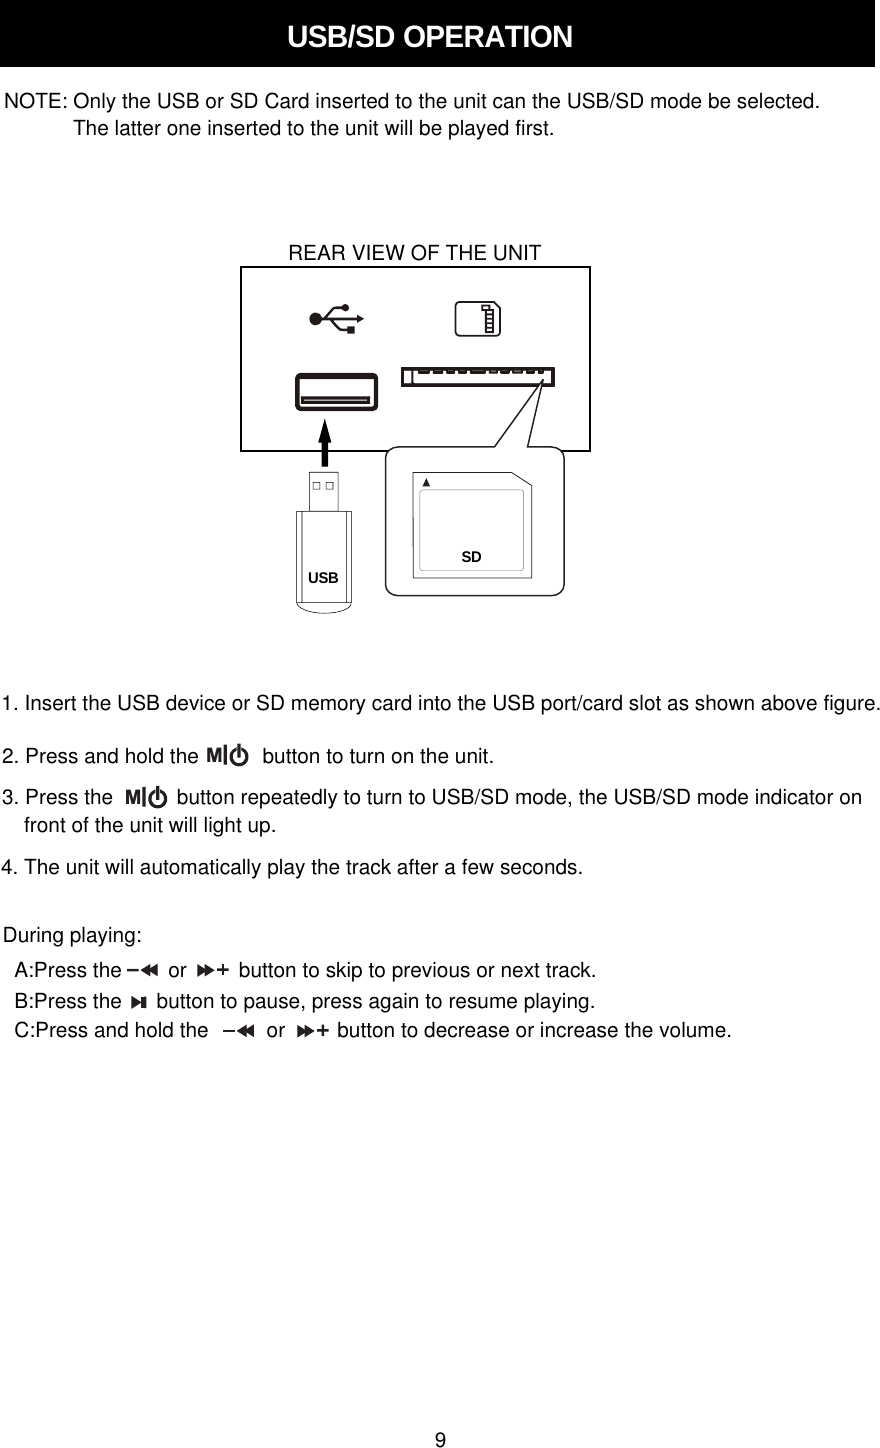 USB/Sd OPERATIONNOTE: Only the USB or SD Card inserted to the unit can the USB/SD mode be selected.The latter one inserted to the unit will be played first.USBSd1. Insert the USB device or SD memory card into the USB port/card slot as shown above figure.2. Press and hold the           button to turn on the unit.M3. Press the           button repeatedly to turn to USB/SD mode, the USB/SD mode indicator onMfront of the unit will light up.During playing:A:Press the        or         button to skip to previous or next track.B:Press the      button to pause, press again to resume playing.C:Press and hold the          or         button to decrease or increase the volume.4. The unit will automatically play the track after a few seconds.REAR VIEW OF THE UNIT9